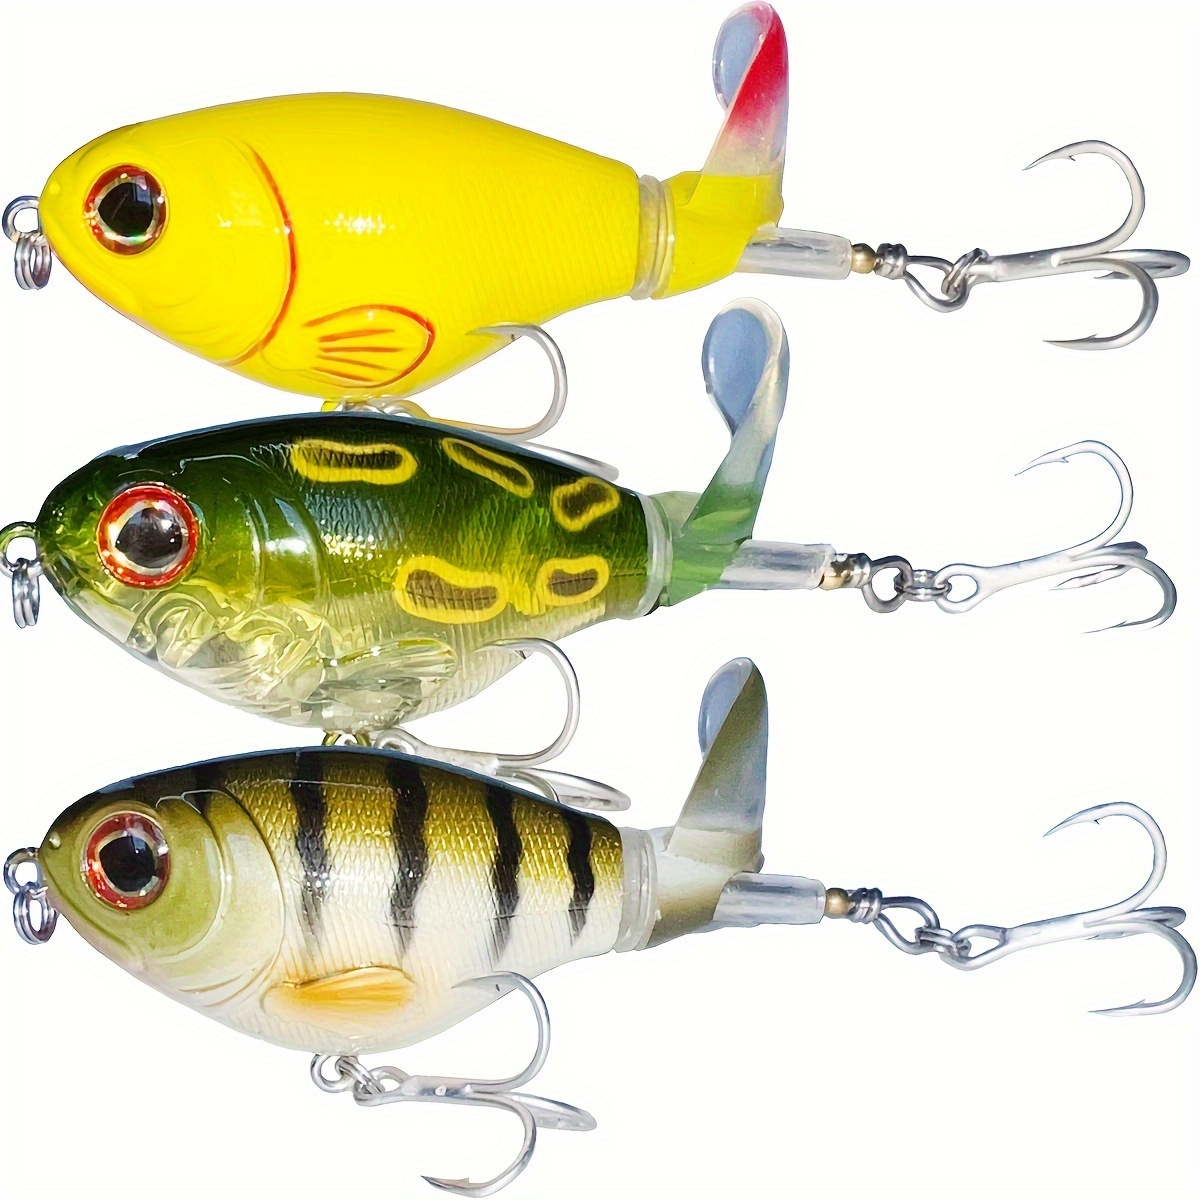 Dovesun 5PCS Topwater Fishing Lure Fishing Lure for Bass Catfish Pike Perch  Top Water Bait for Bass Fishing with Propeller Tail Pencil Floating Lure